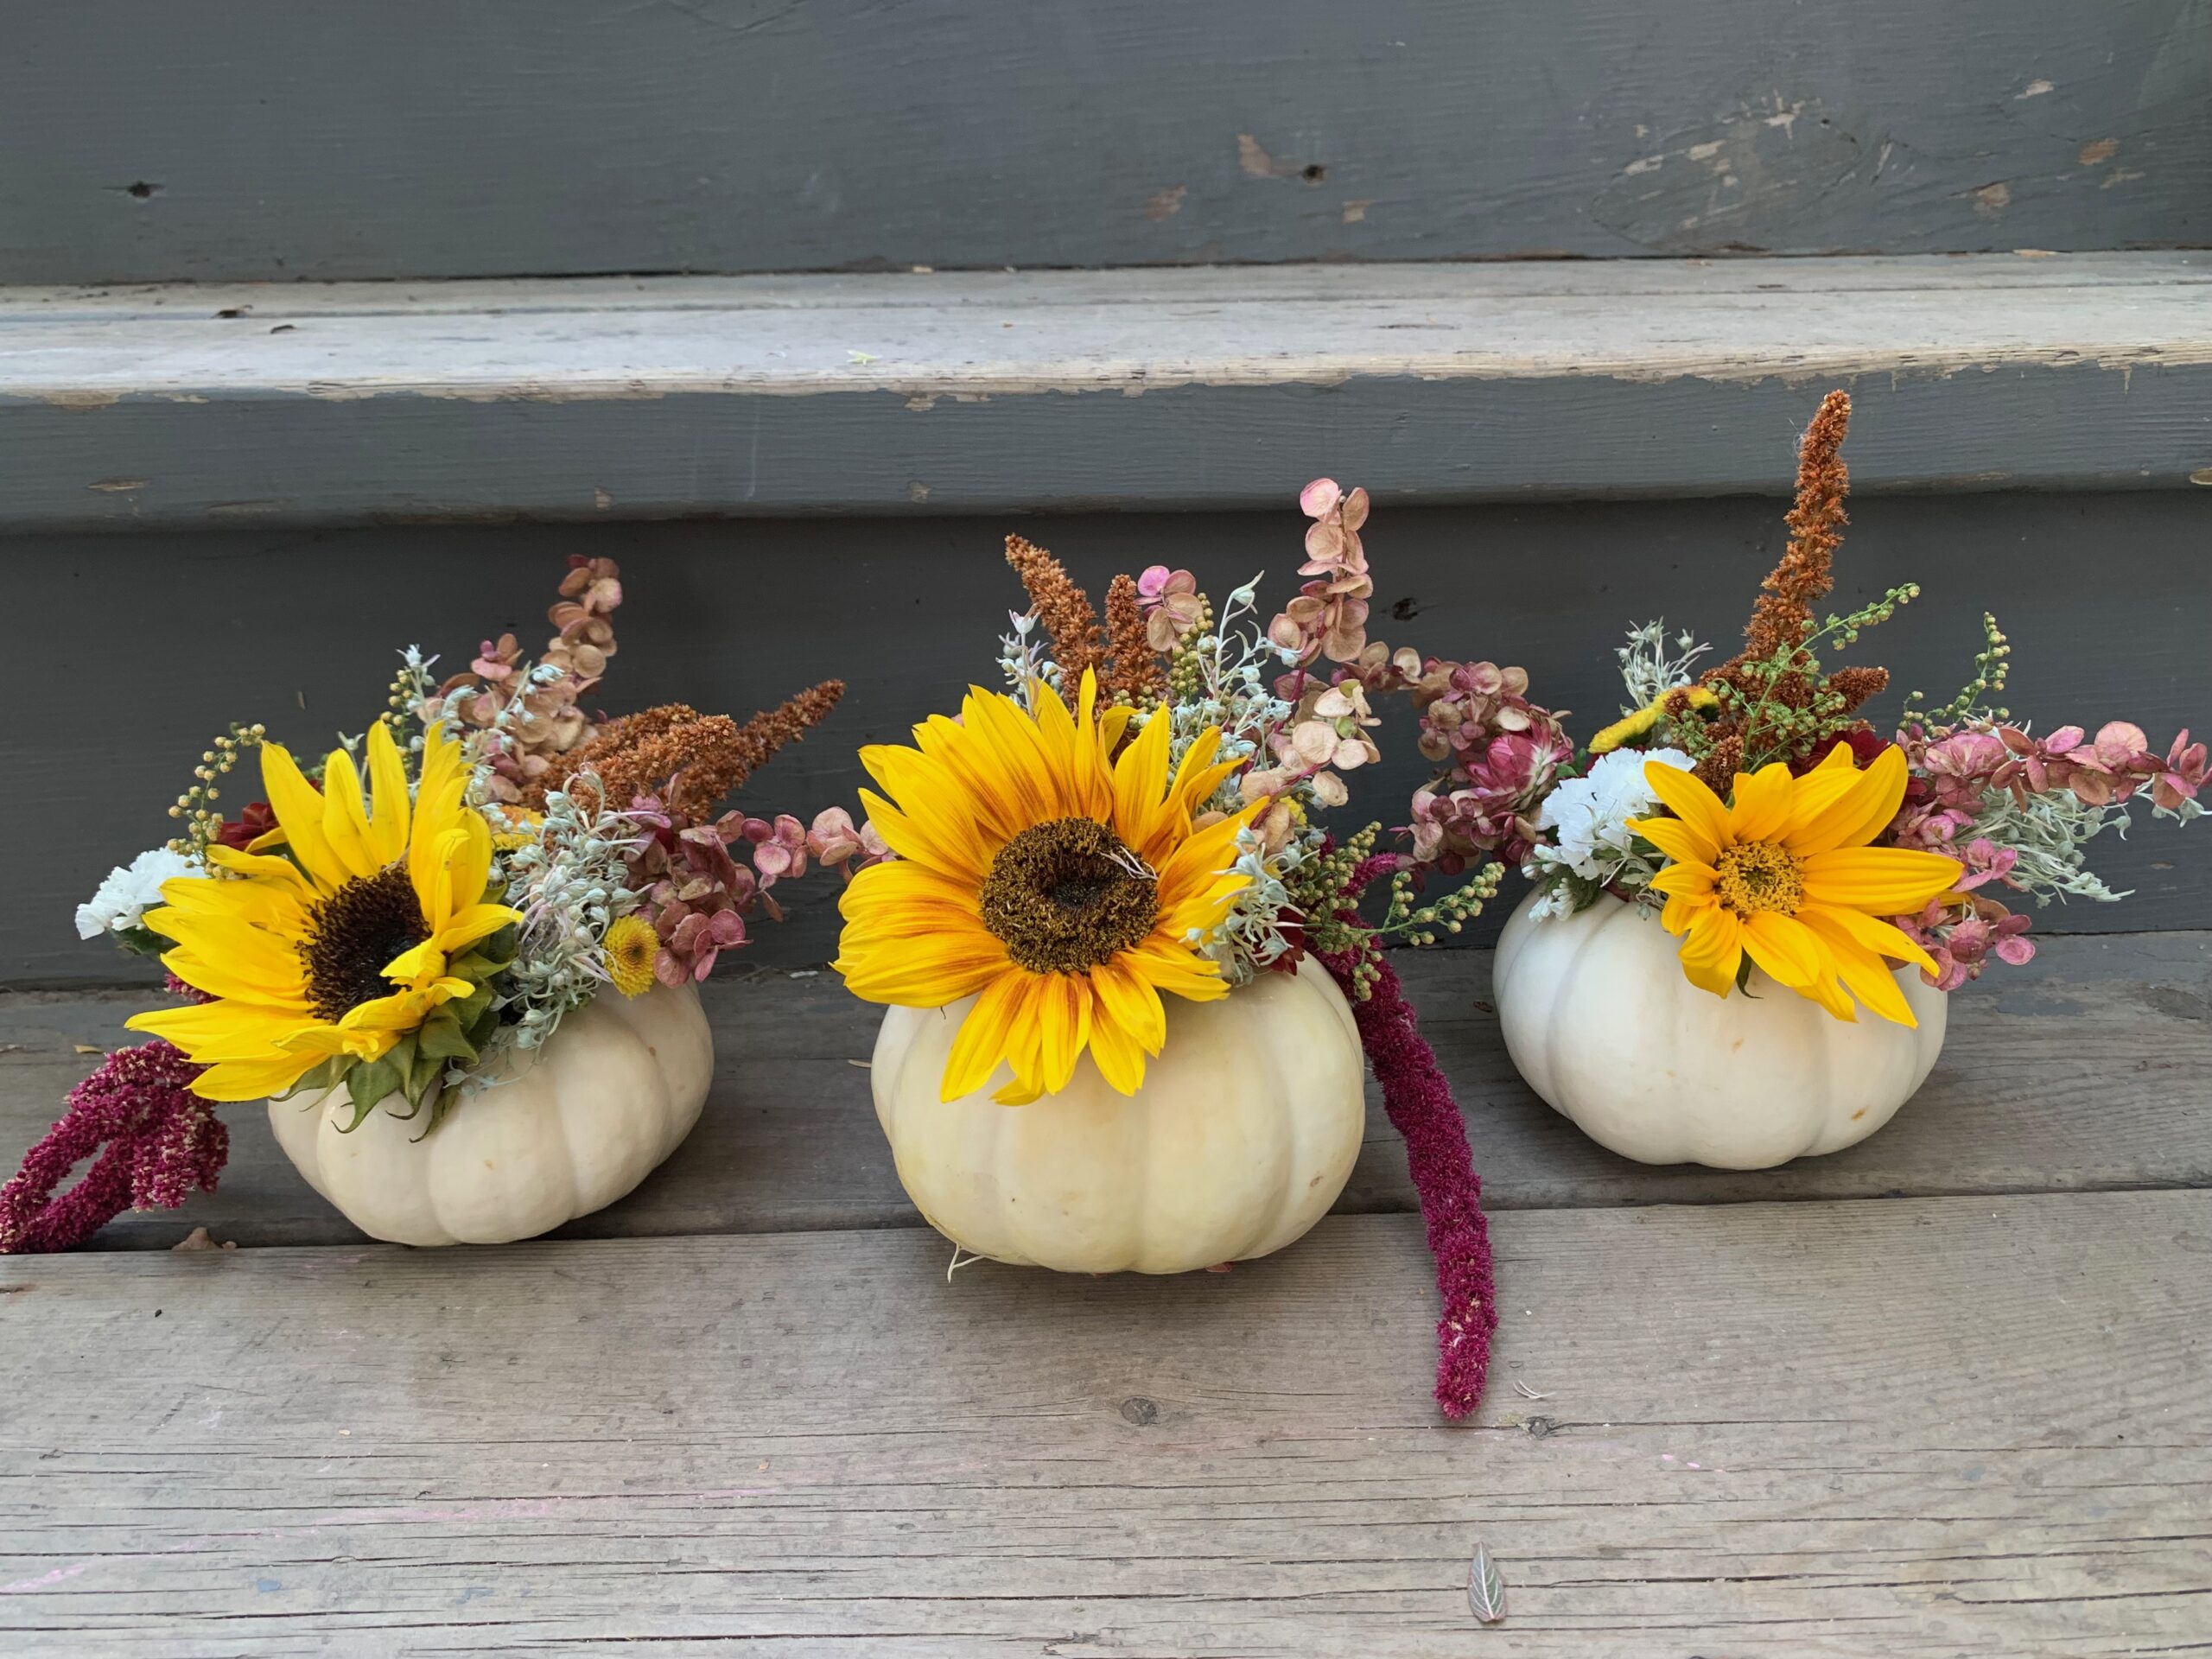 Three small white pumpkin centrepieces, filled with sunflowers and amaranth.